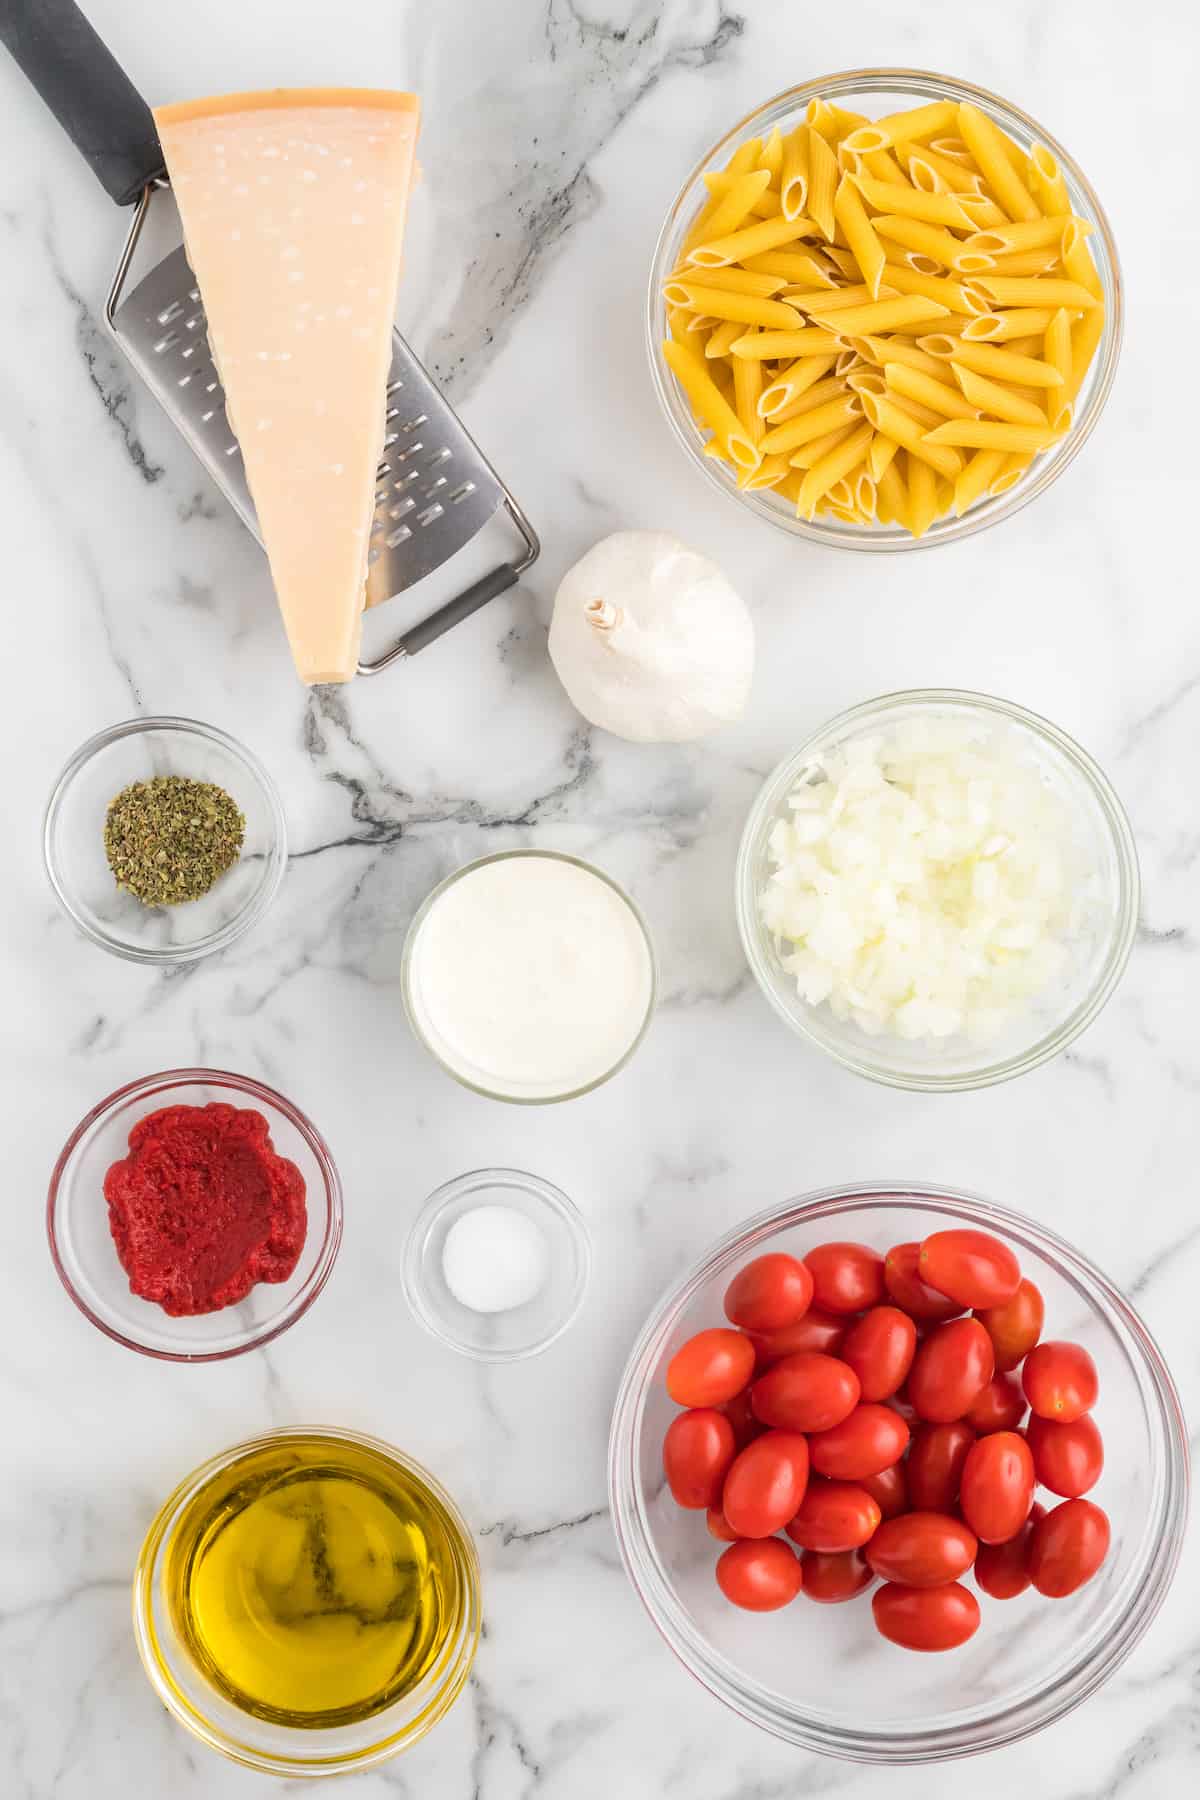 ingredients for the creamy pomodoro sauce in small bowls.